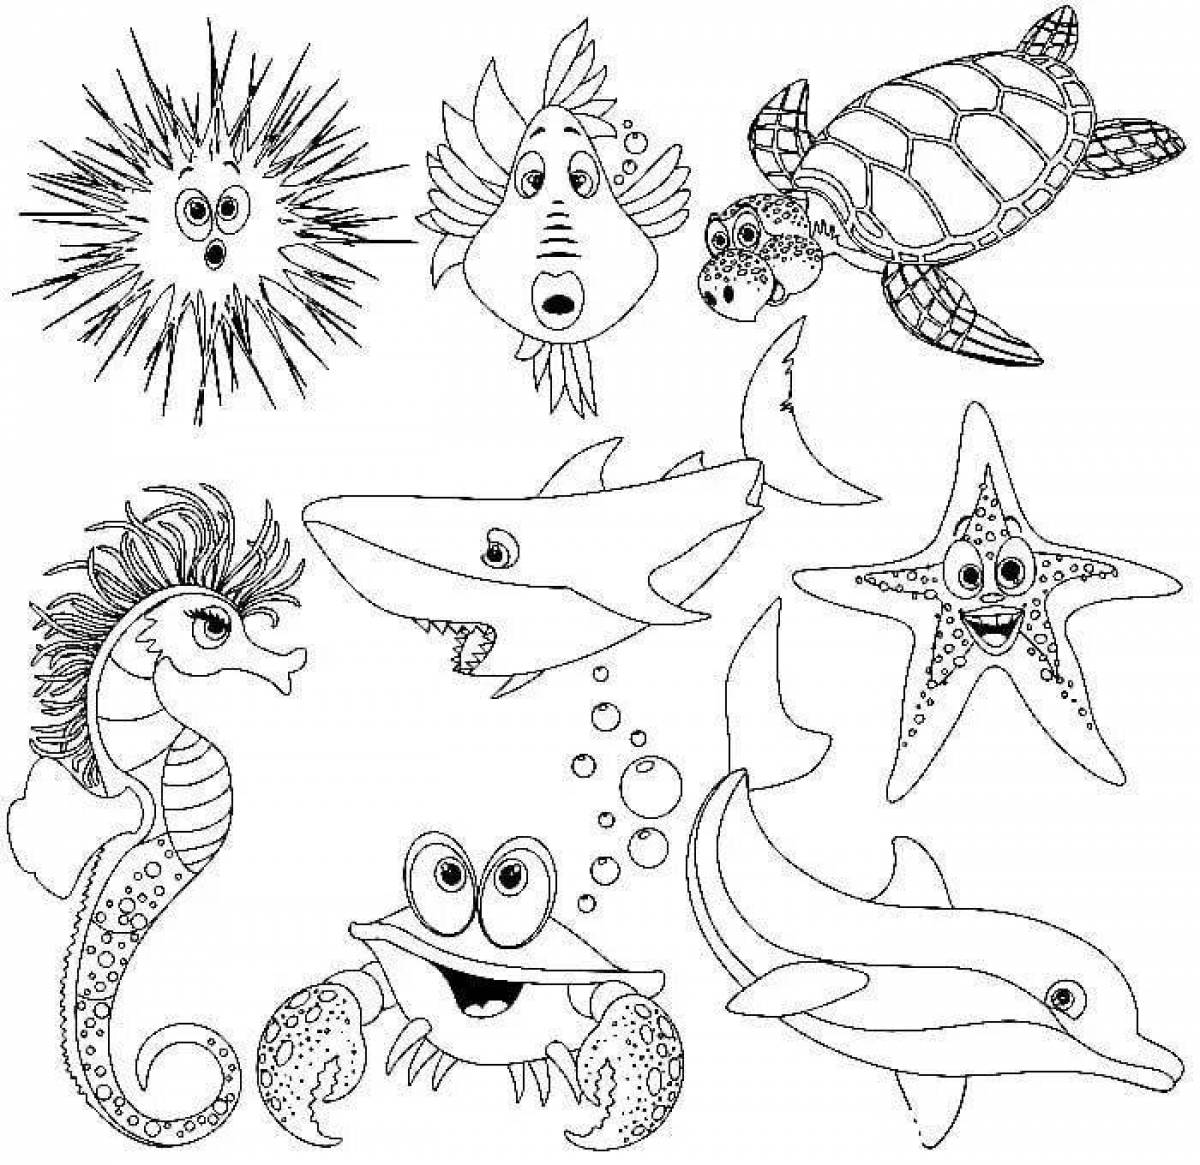 Outstanding marine life coloring book for 5-6 year olds